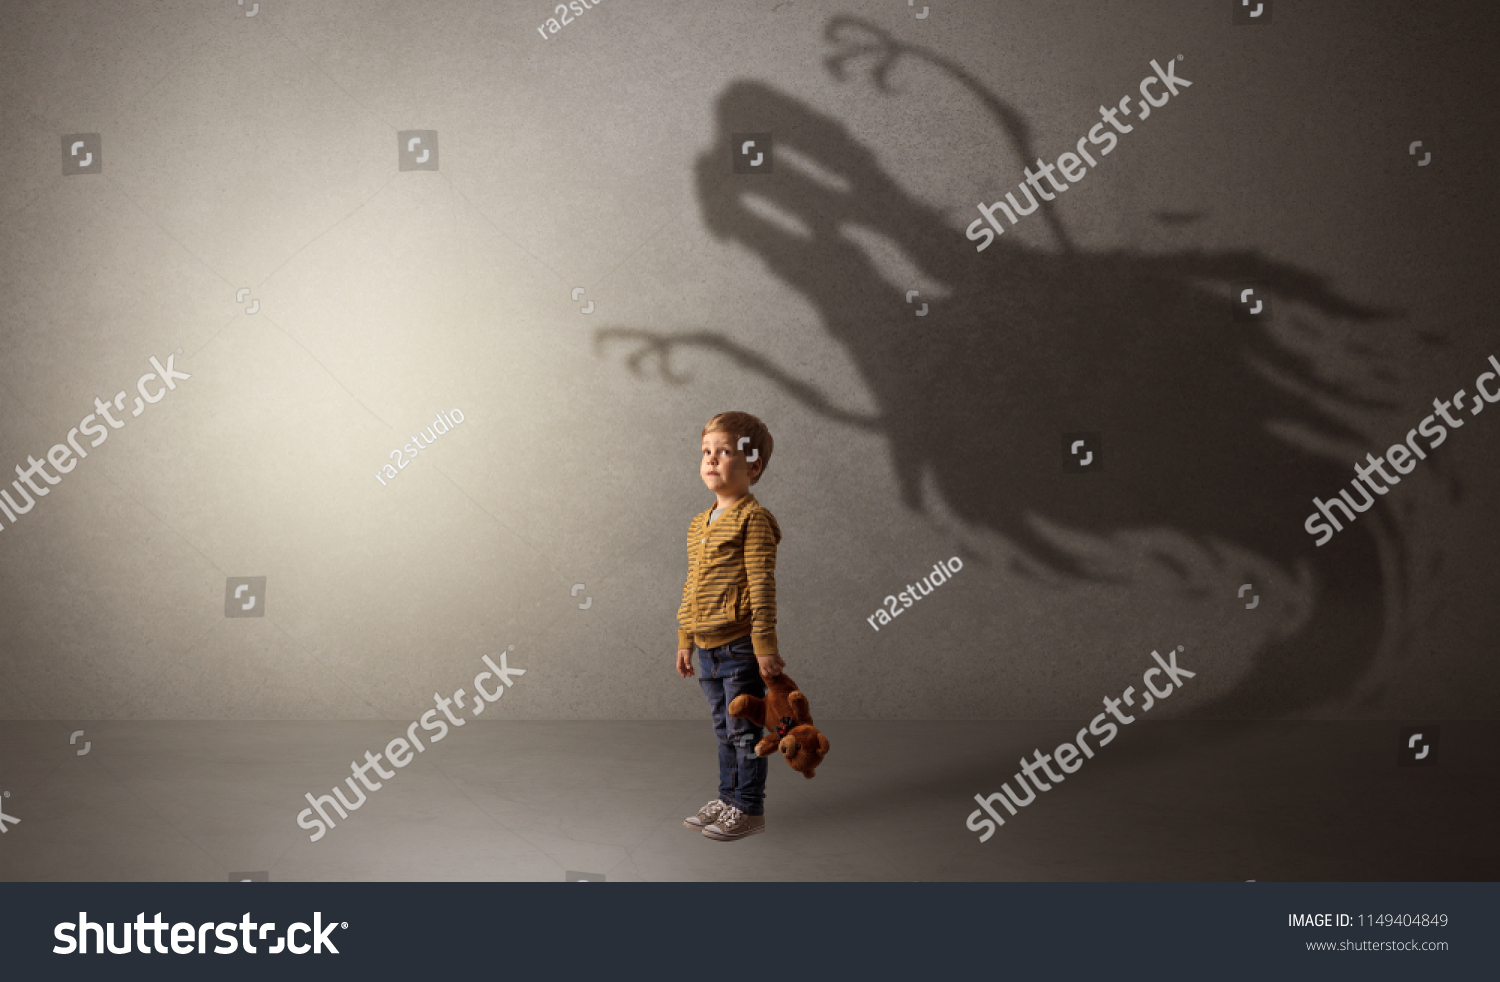 Scary ghost shadow in a dark empty room with a cute blond child #1149404849